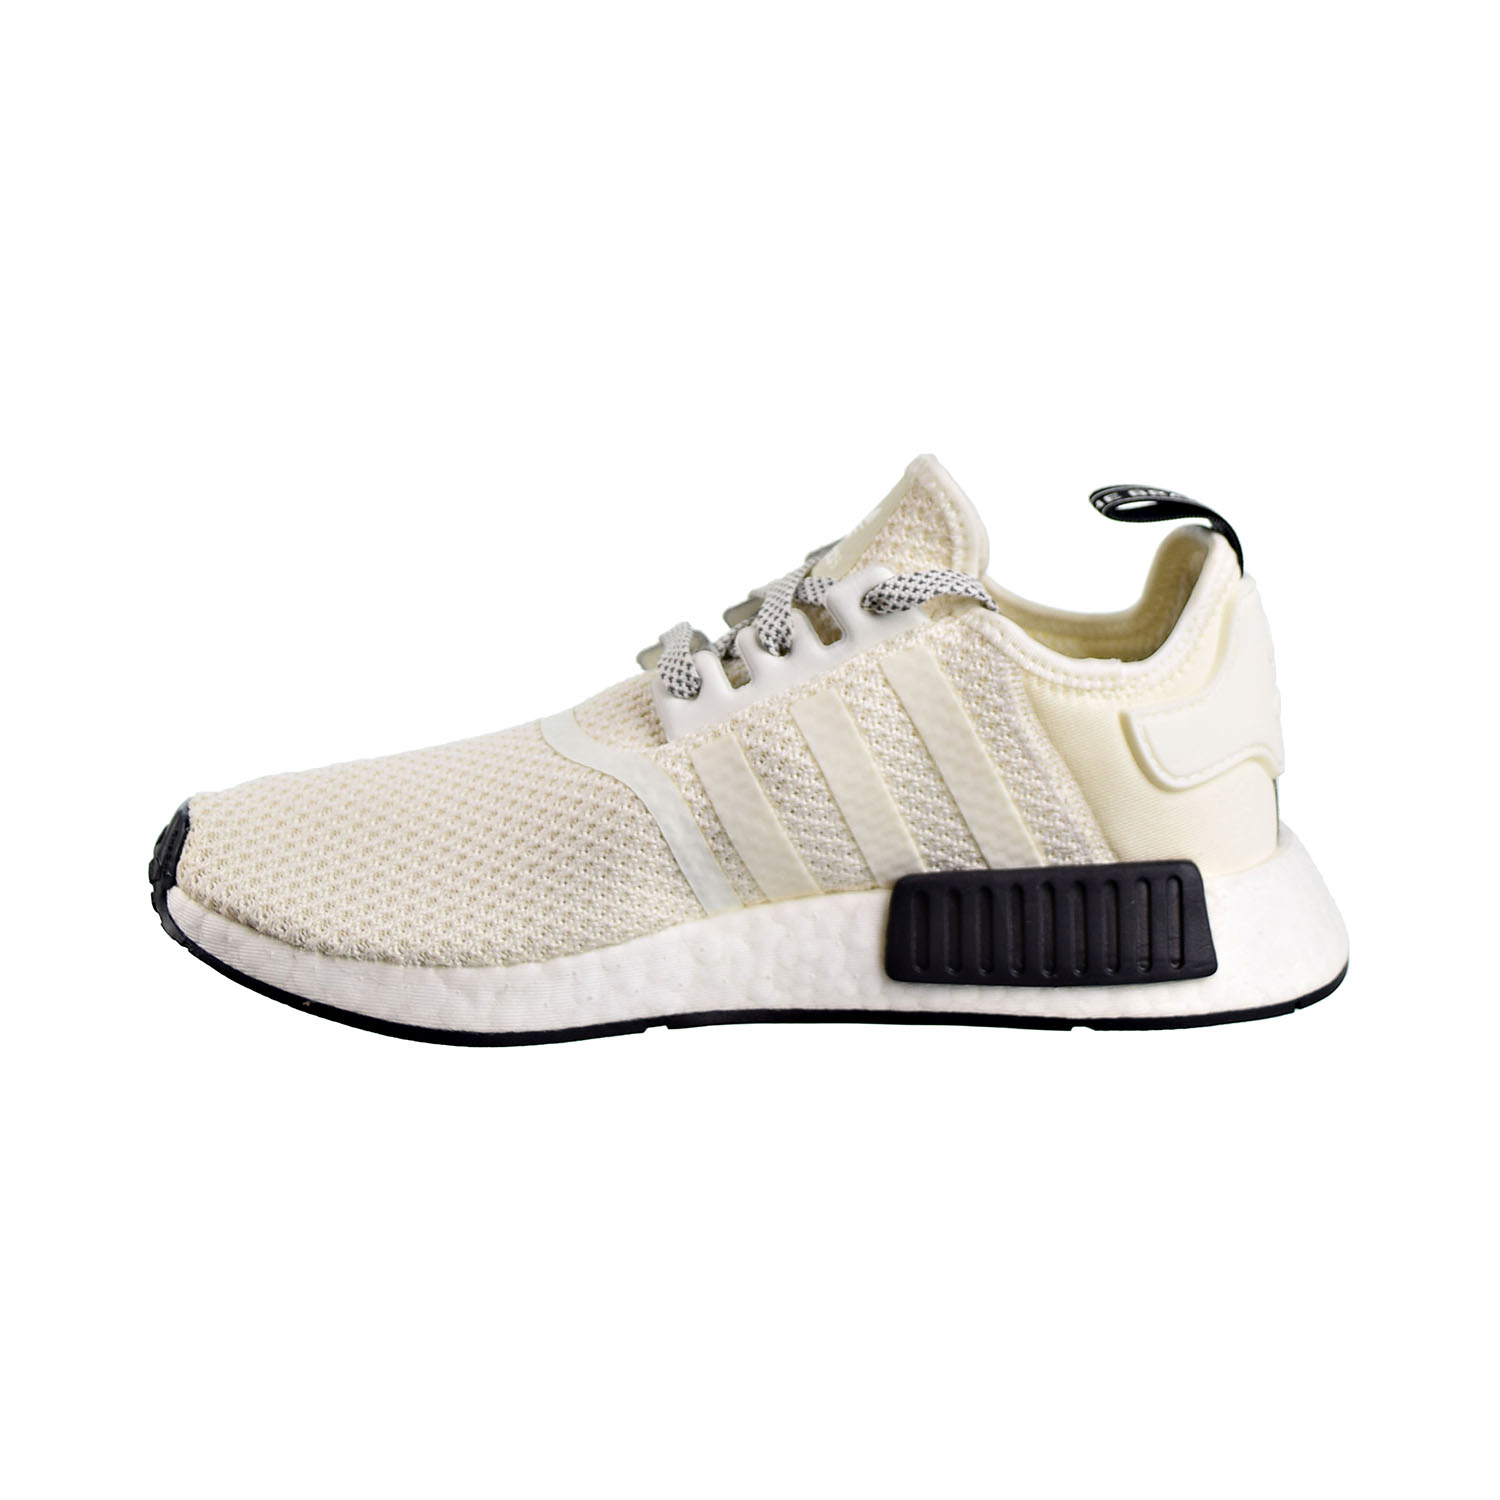 nmd_r1 shoes carbon